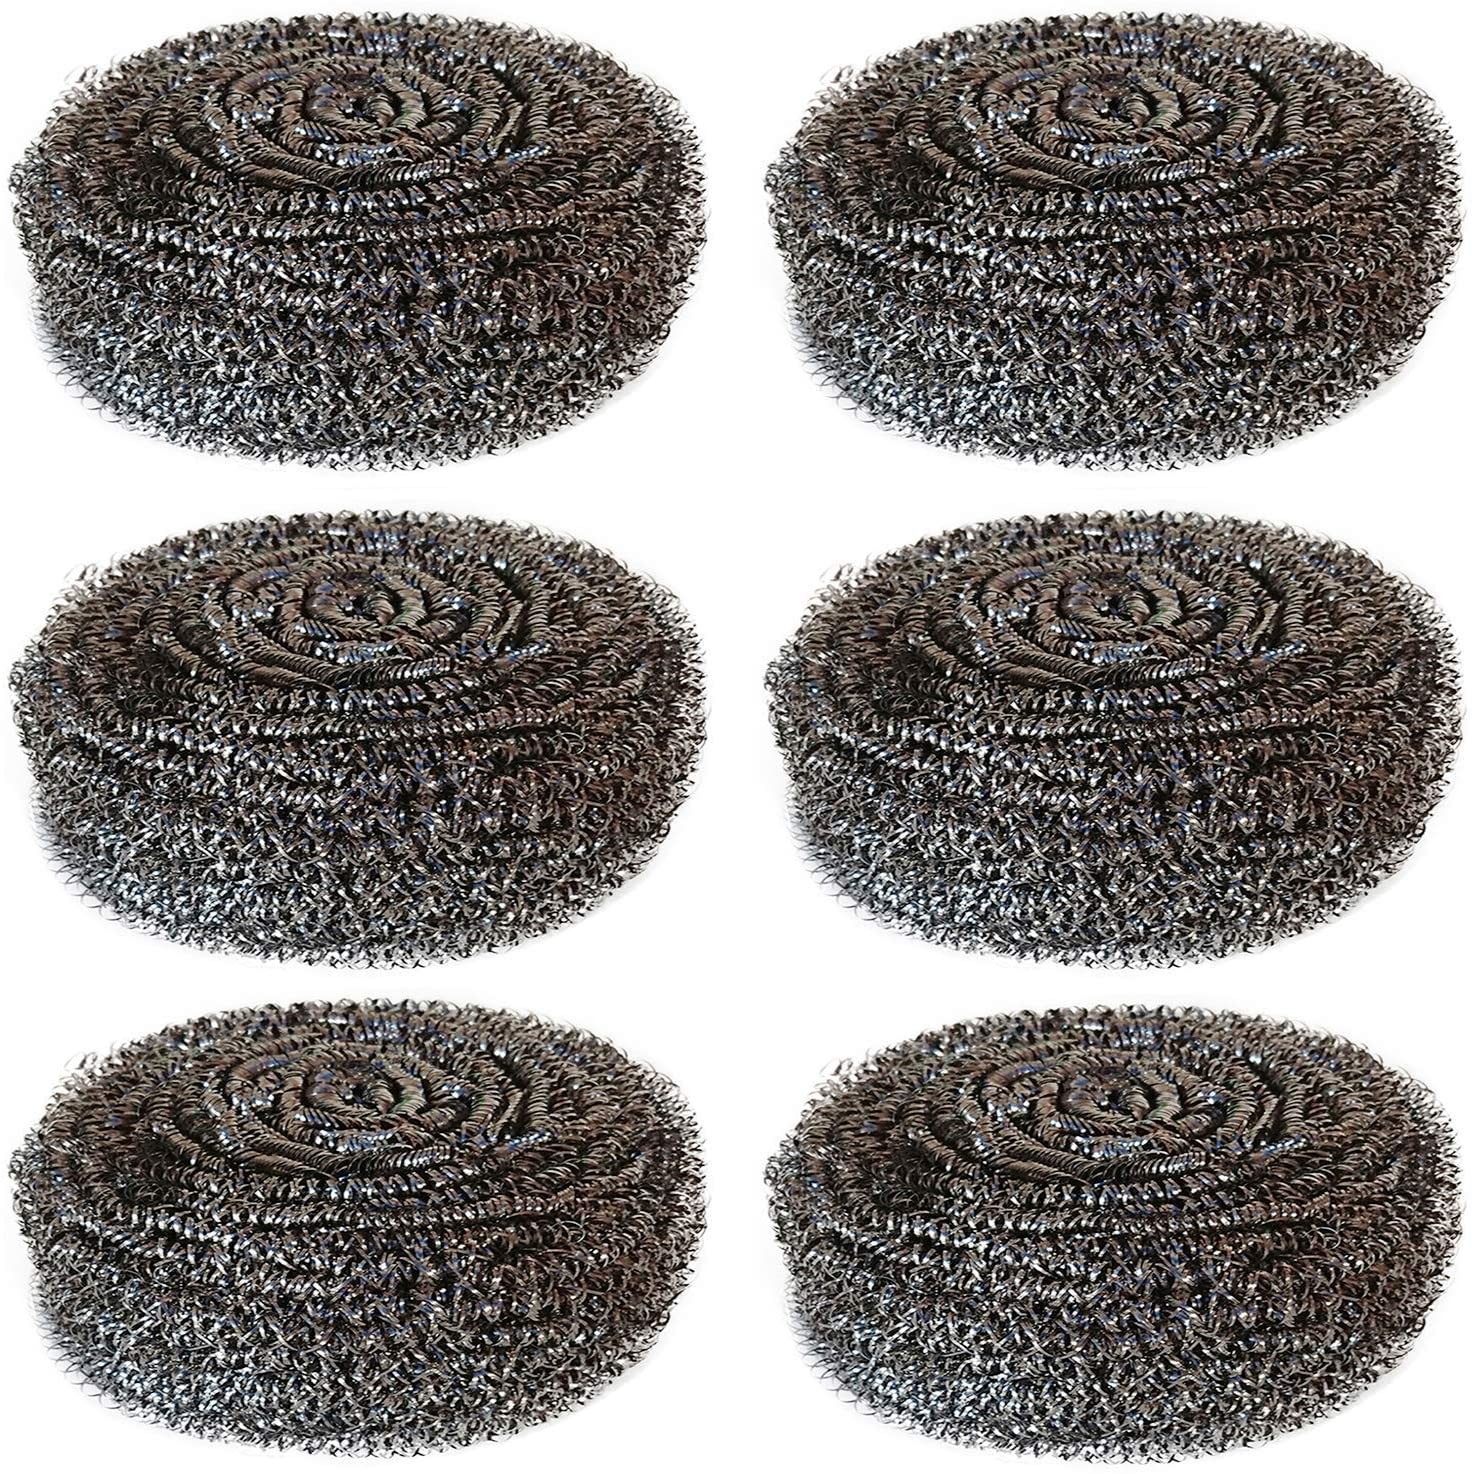 Wholesale Stainless Steel Scrubbers, Ideal for Cast Iron Pans, Powerful Scrubbing for Stubborn Messes, 3 Scrubbers from china suppliers